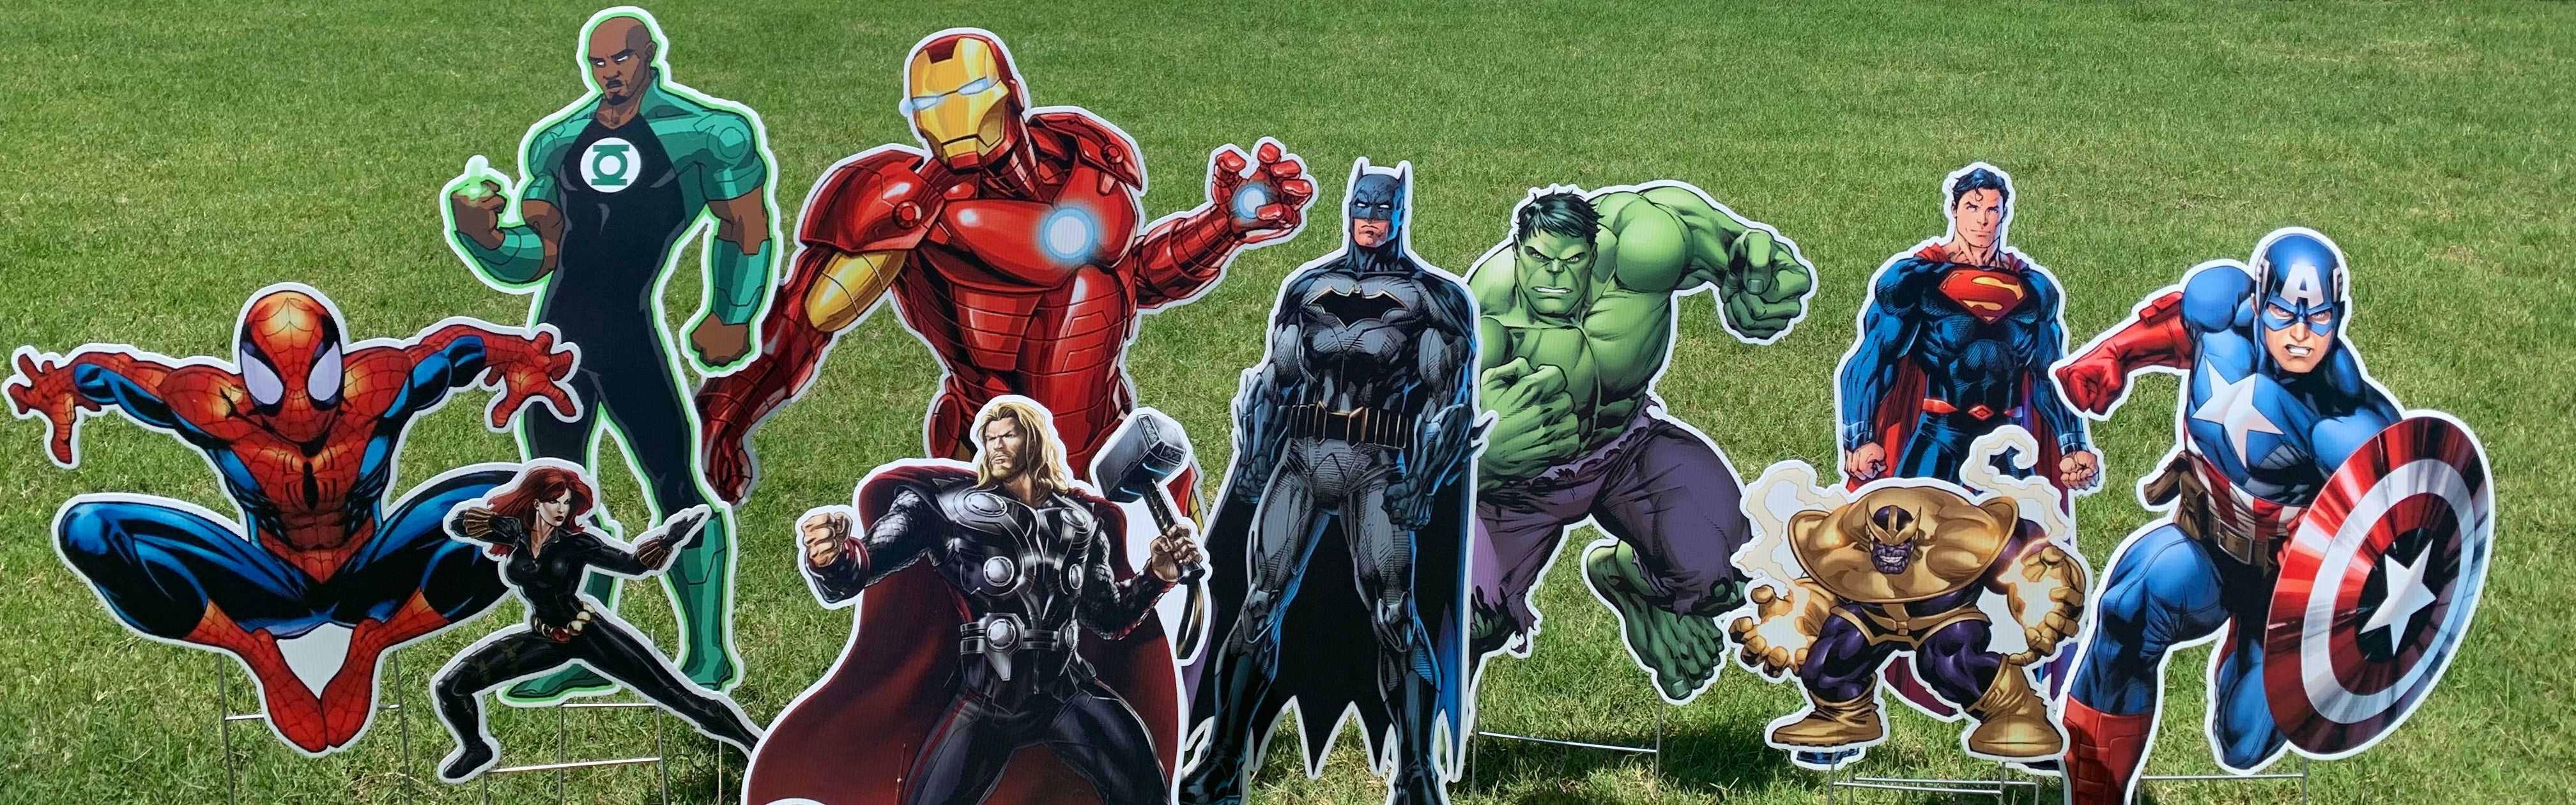 Yard card sign collection marvel 